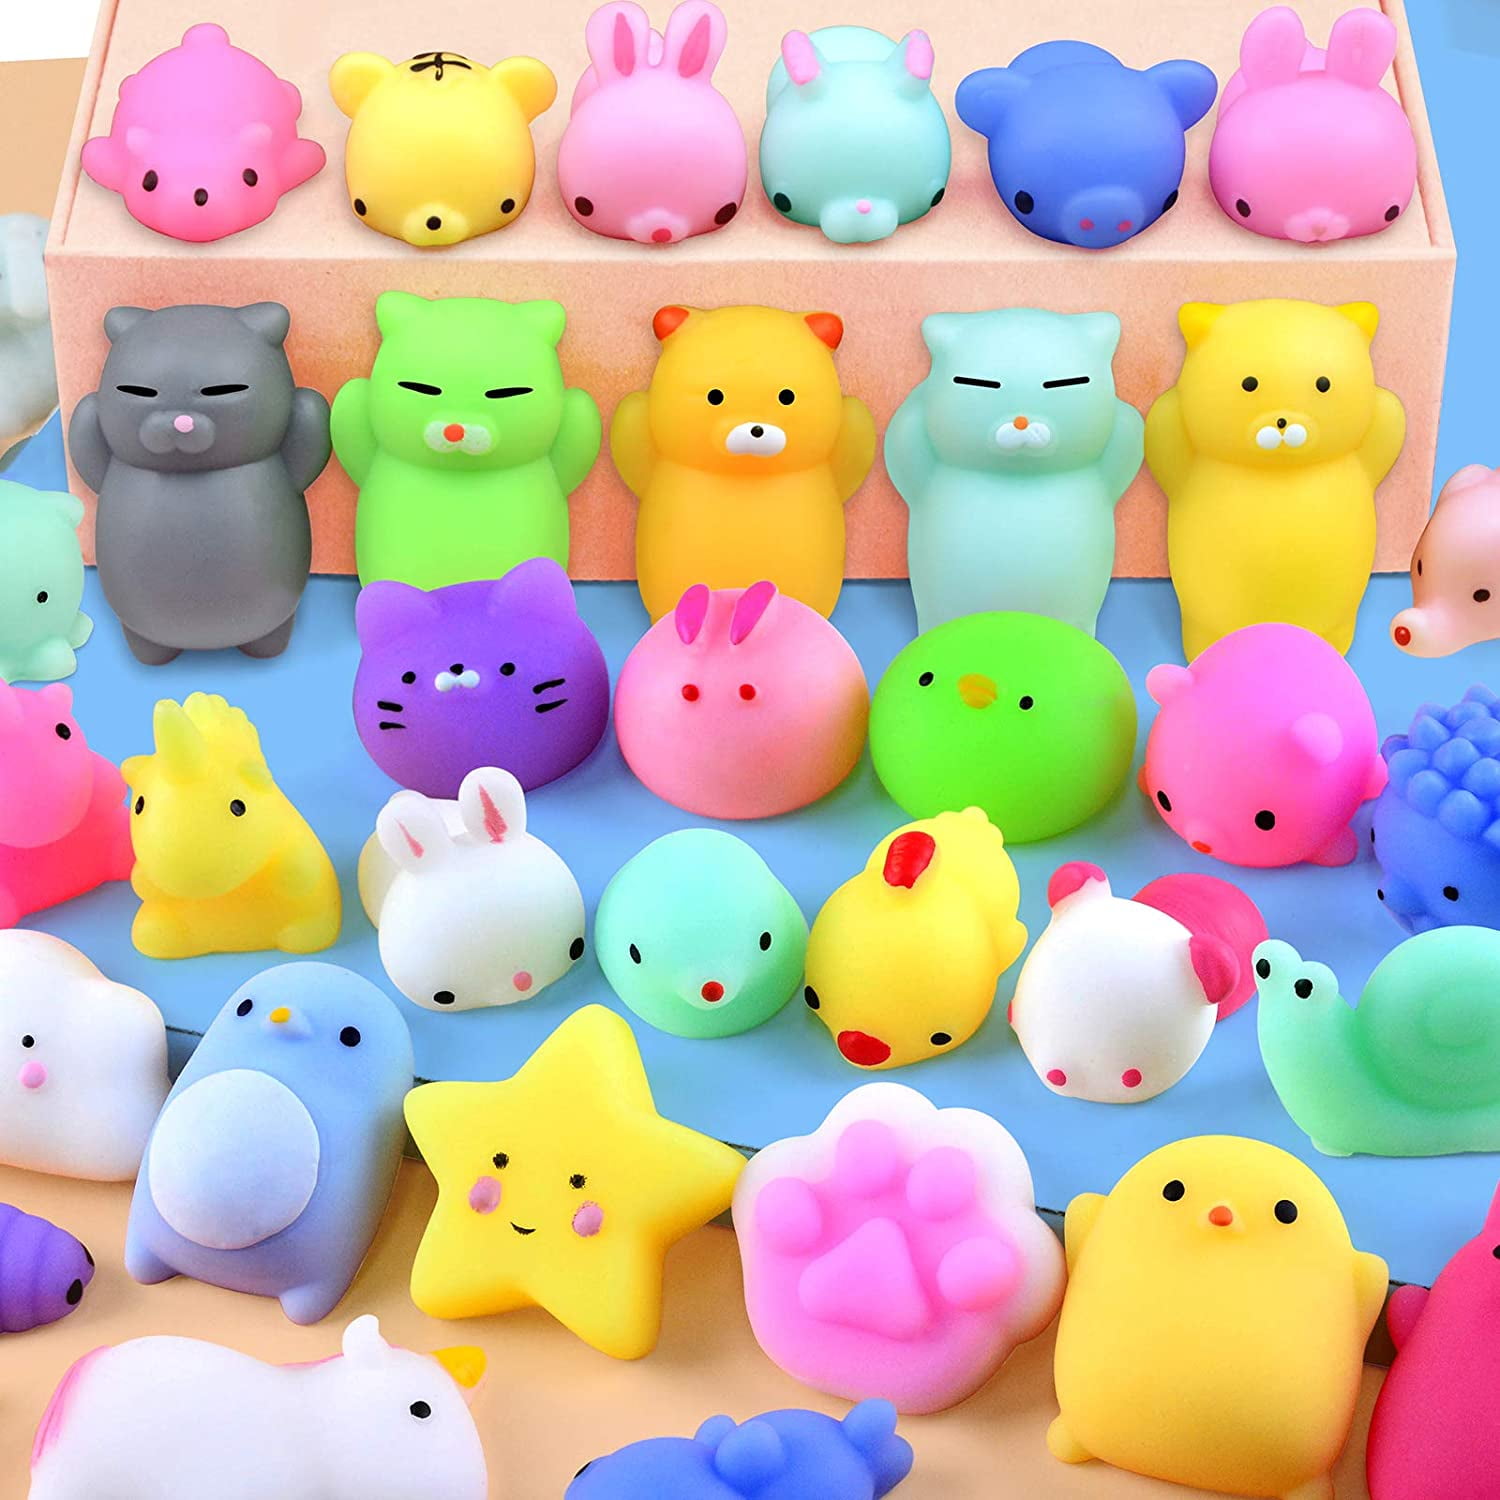 Kids Favorite Cute Kittens Squishy Slime Surprise Milk Box Toys ▻   ▻ Free Shipping ▻ Up to 70% OFF